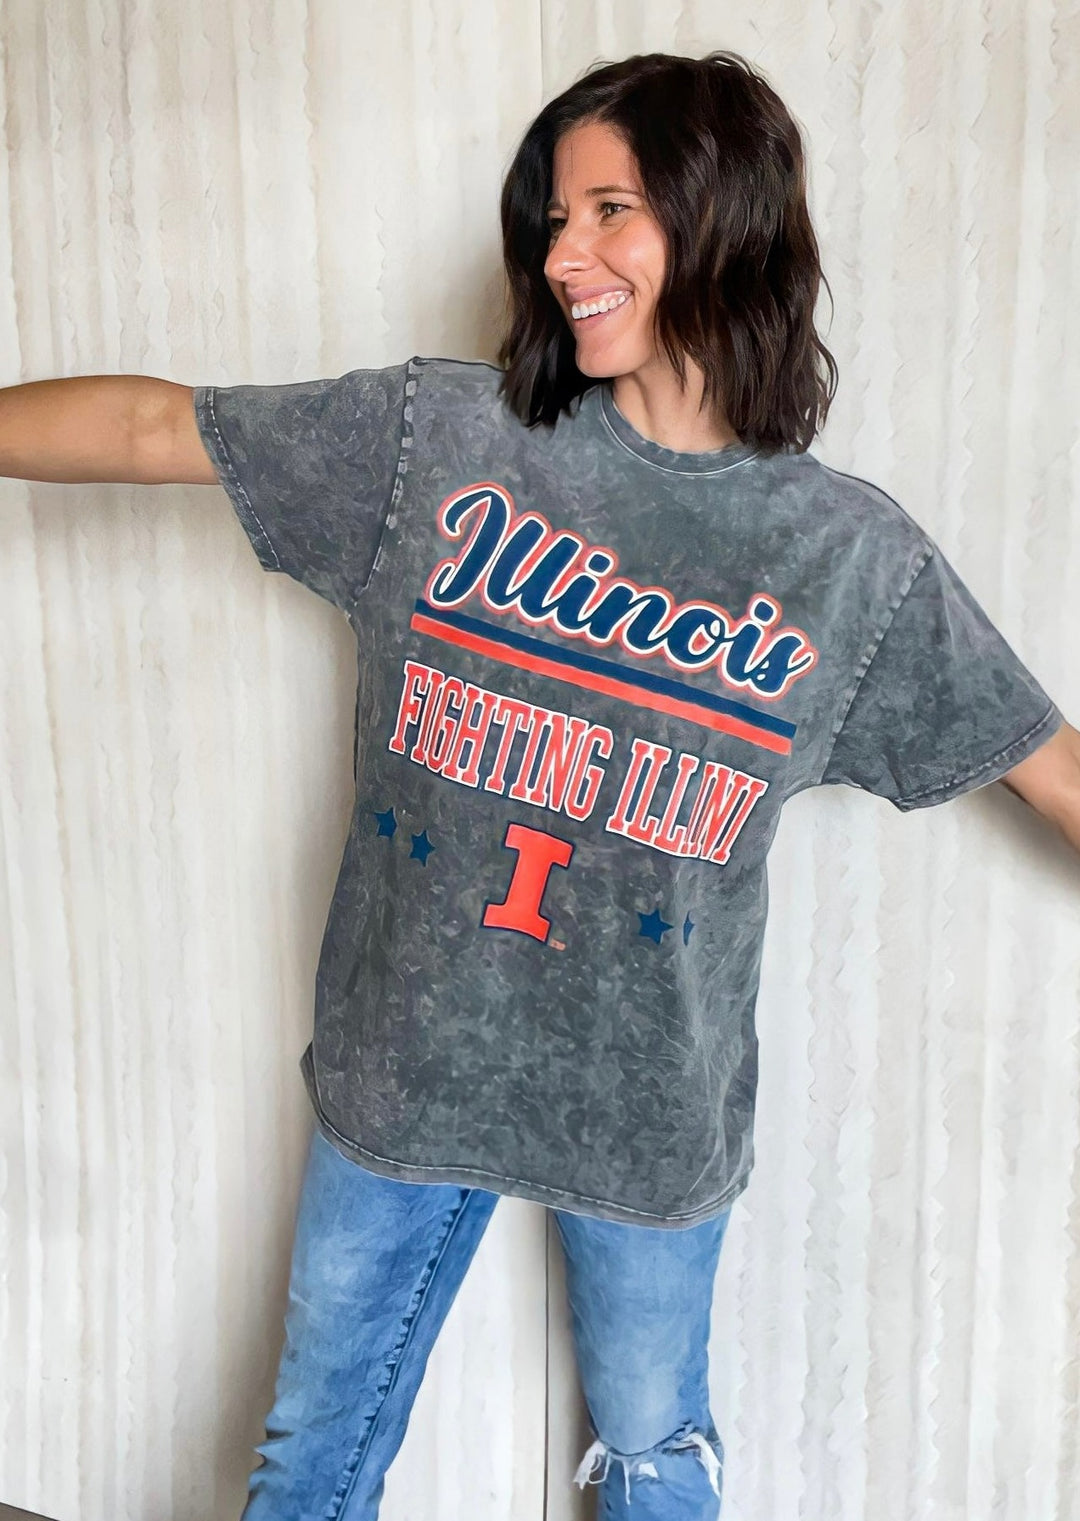 Mineral Washed Oversized llinois Tee | Officially Licensed Illinois Fighting Illini T-Shirt